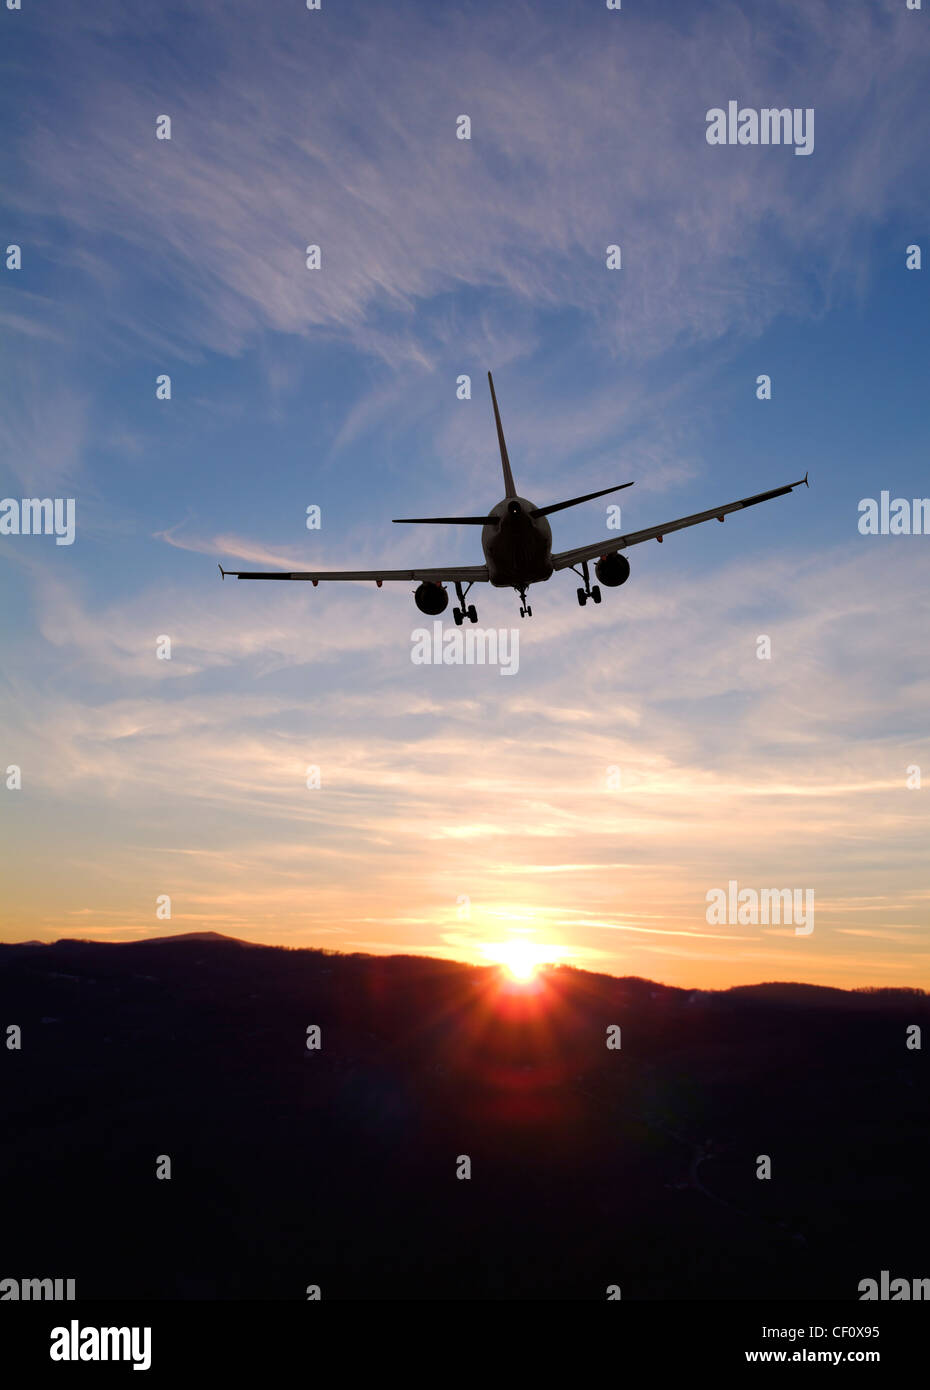 Airplane Taking Off into the Sunset. Stock Photo